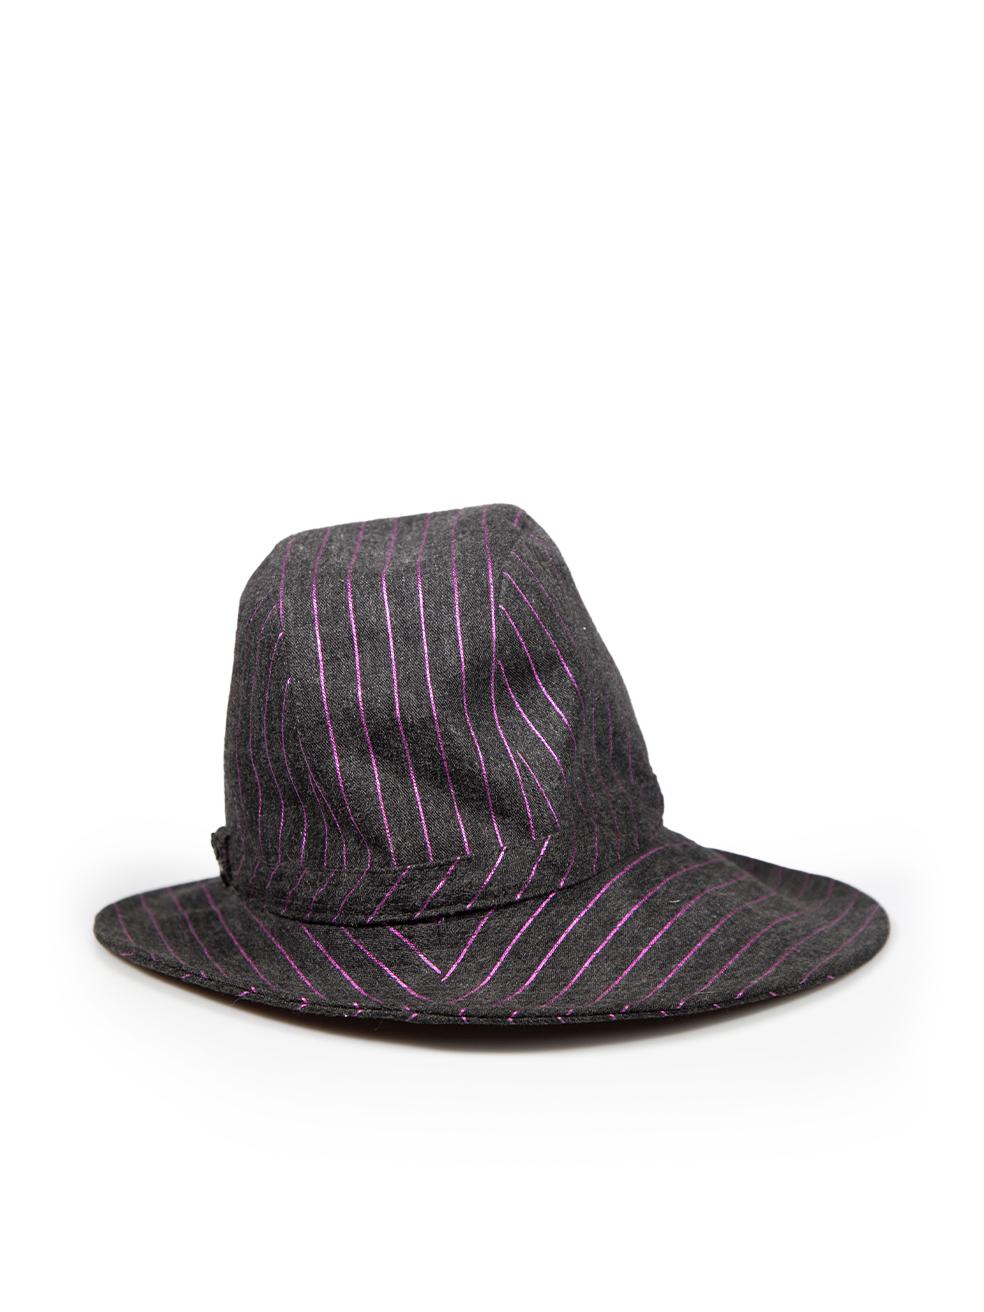 Philip Treacy Grey & Purple Striped Fedora In Excellent Condition For Sale In London, GB